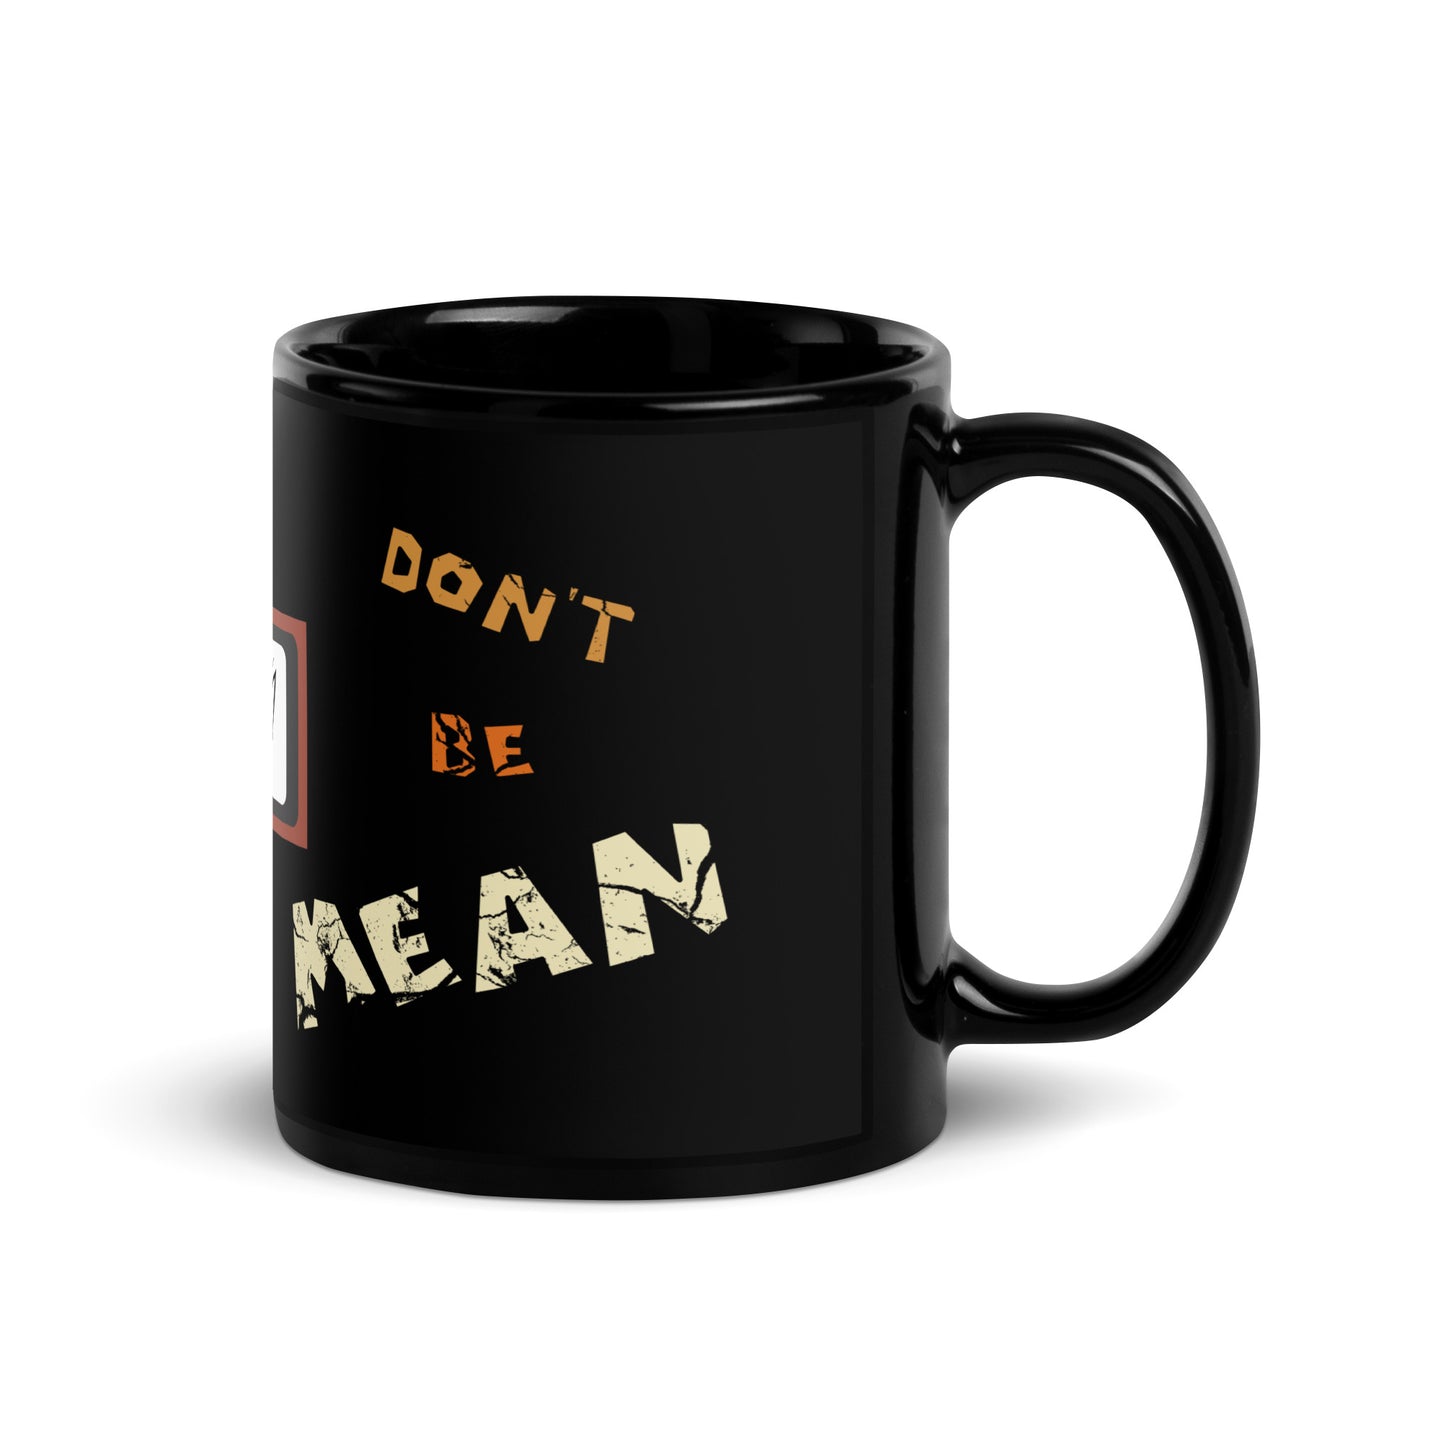 A001 Mug - Black Glossy Ceramic Mug Featuring Sinister Eyes Graphic with text “Abortion is Mean. Don’t be Mean.”